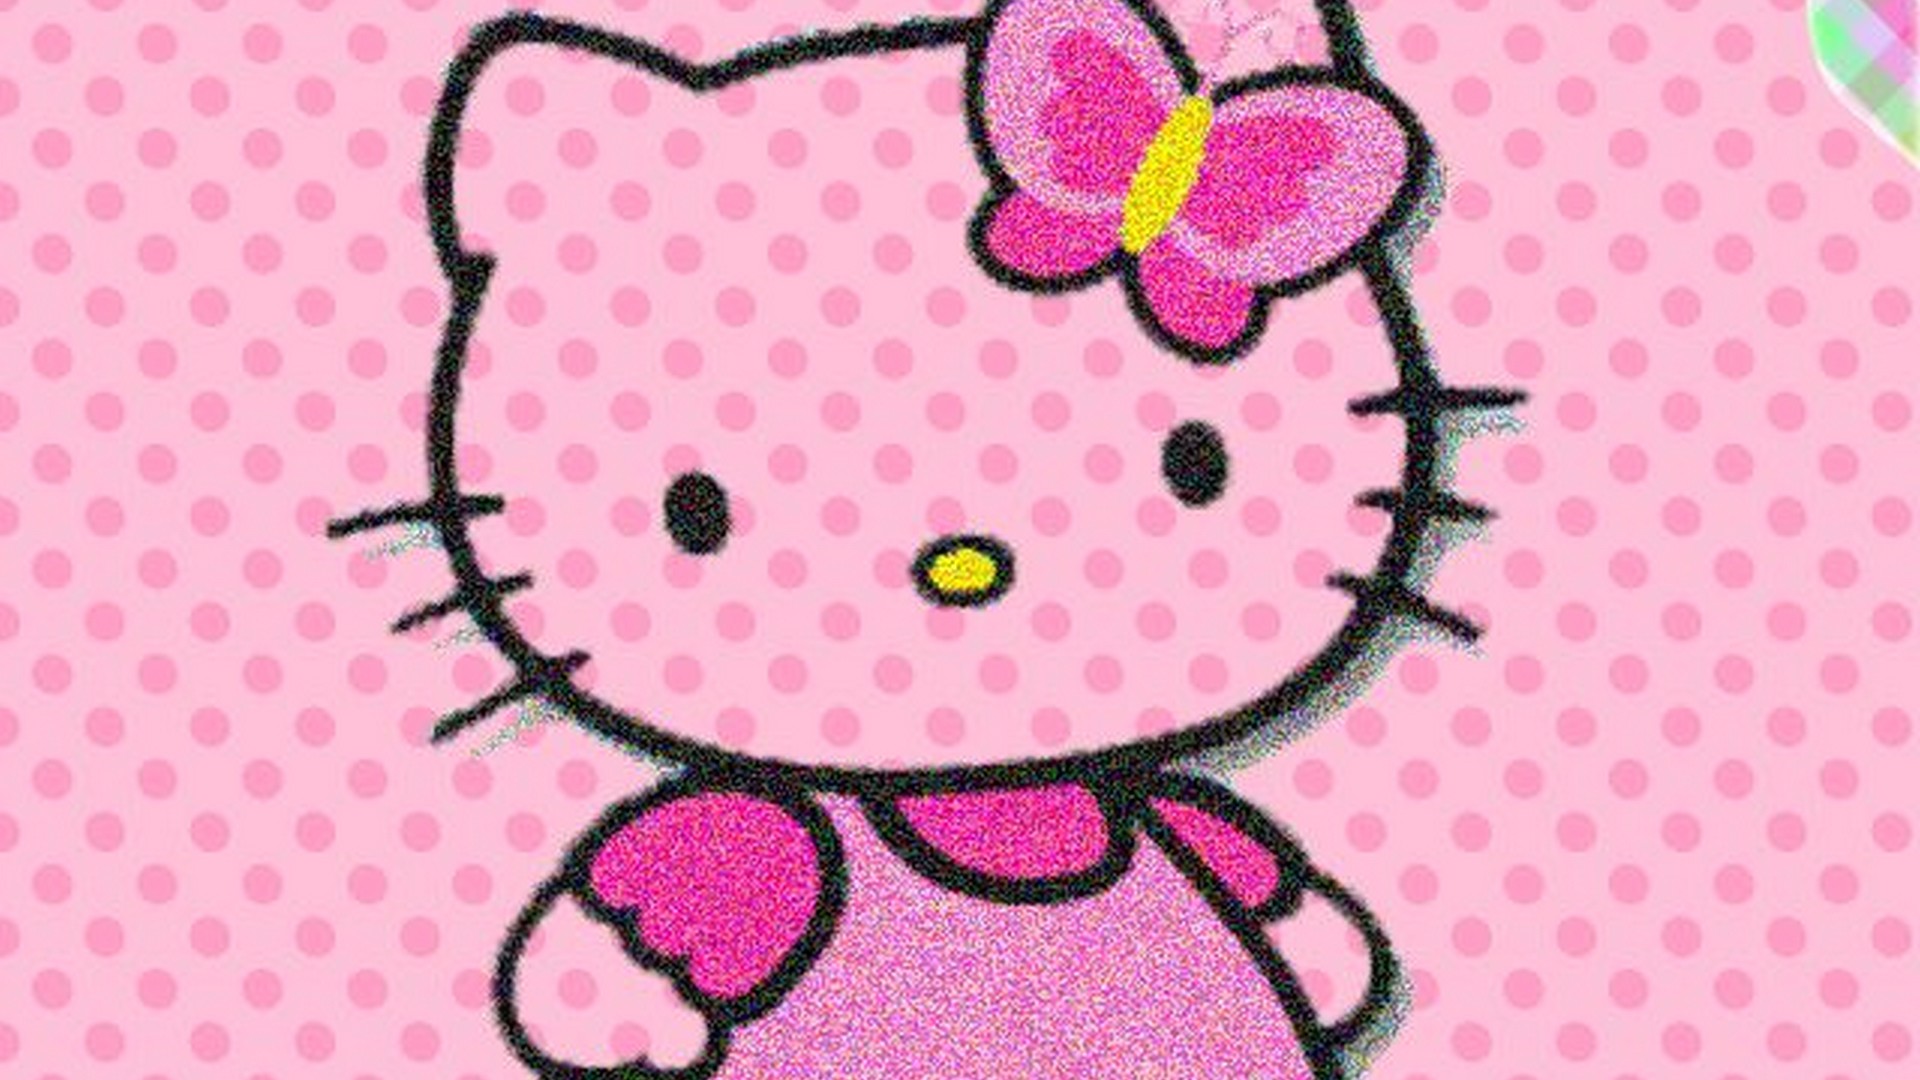 Wallpaper HD Hello Kitty With Resolution 1920X1080 pixel. You can make this wallpaper for your Desktop Computer Backgrounds, Mac Wallpapers, Android Lock screen or iPhone Screensavers